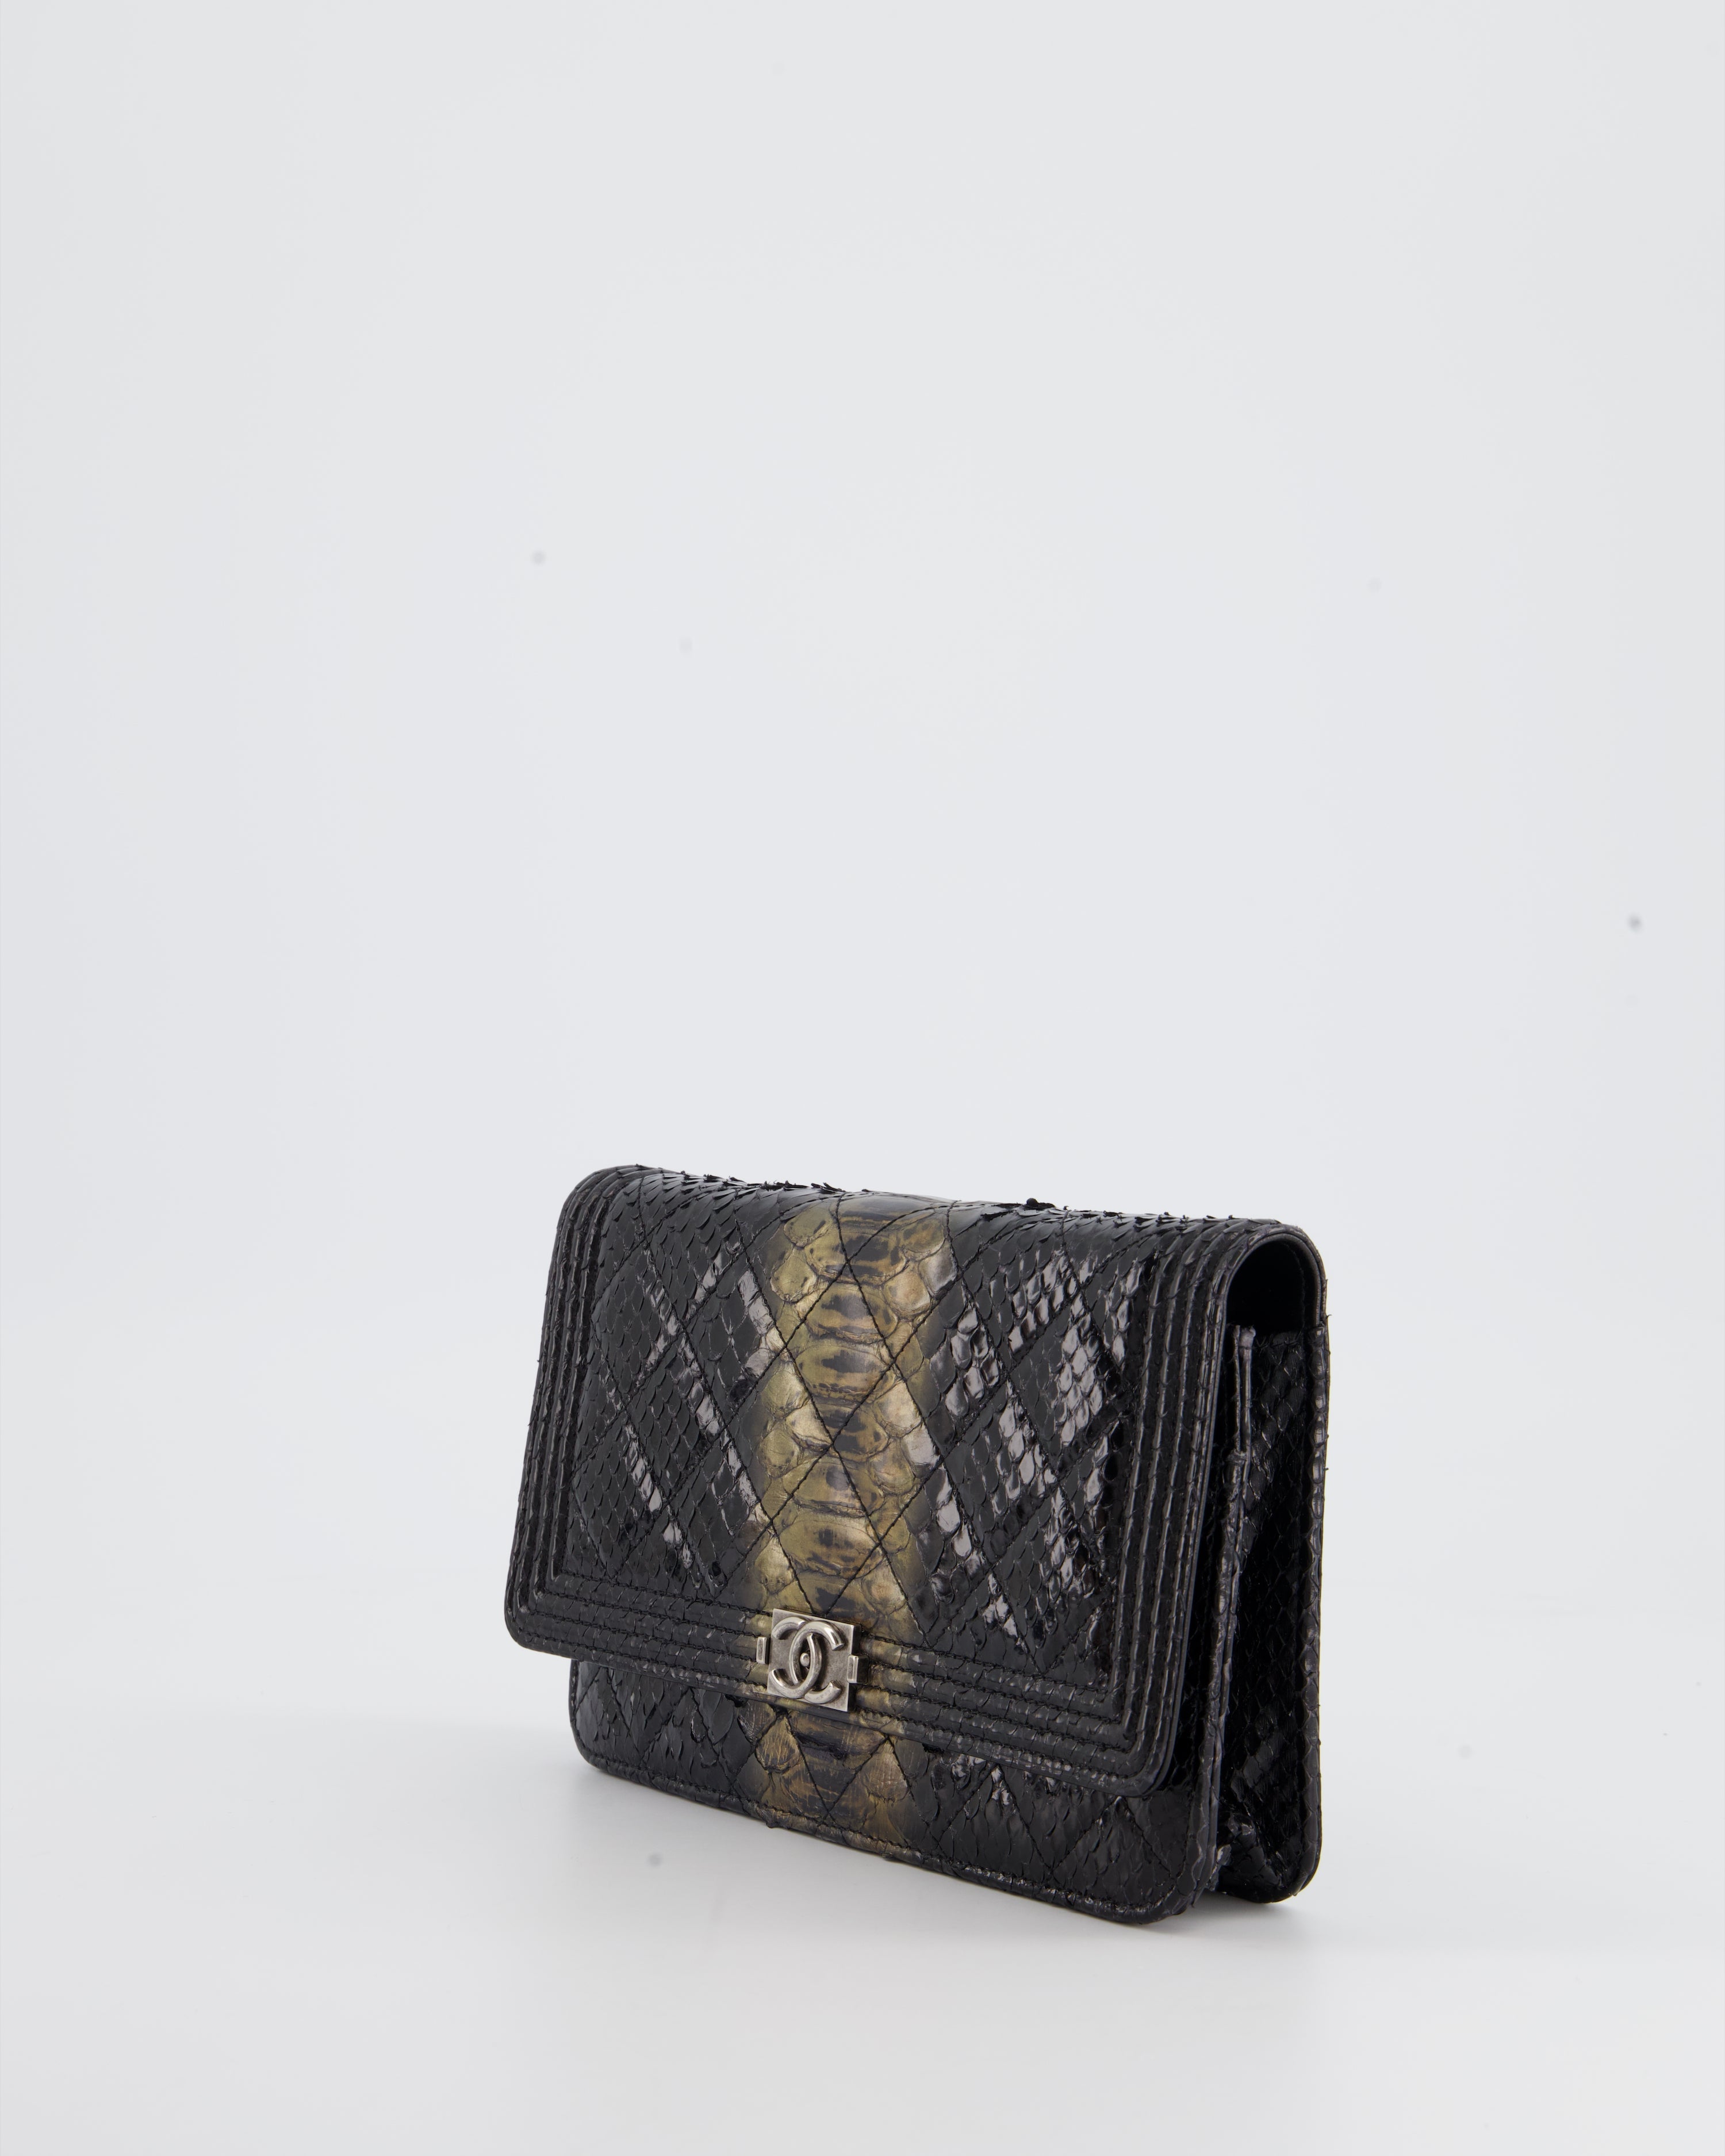 Chanel Black and Gold Wallet on Chain Bag in Python with Ruthenium Hardware